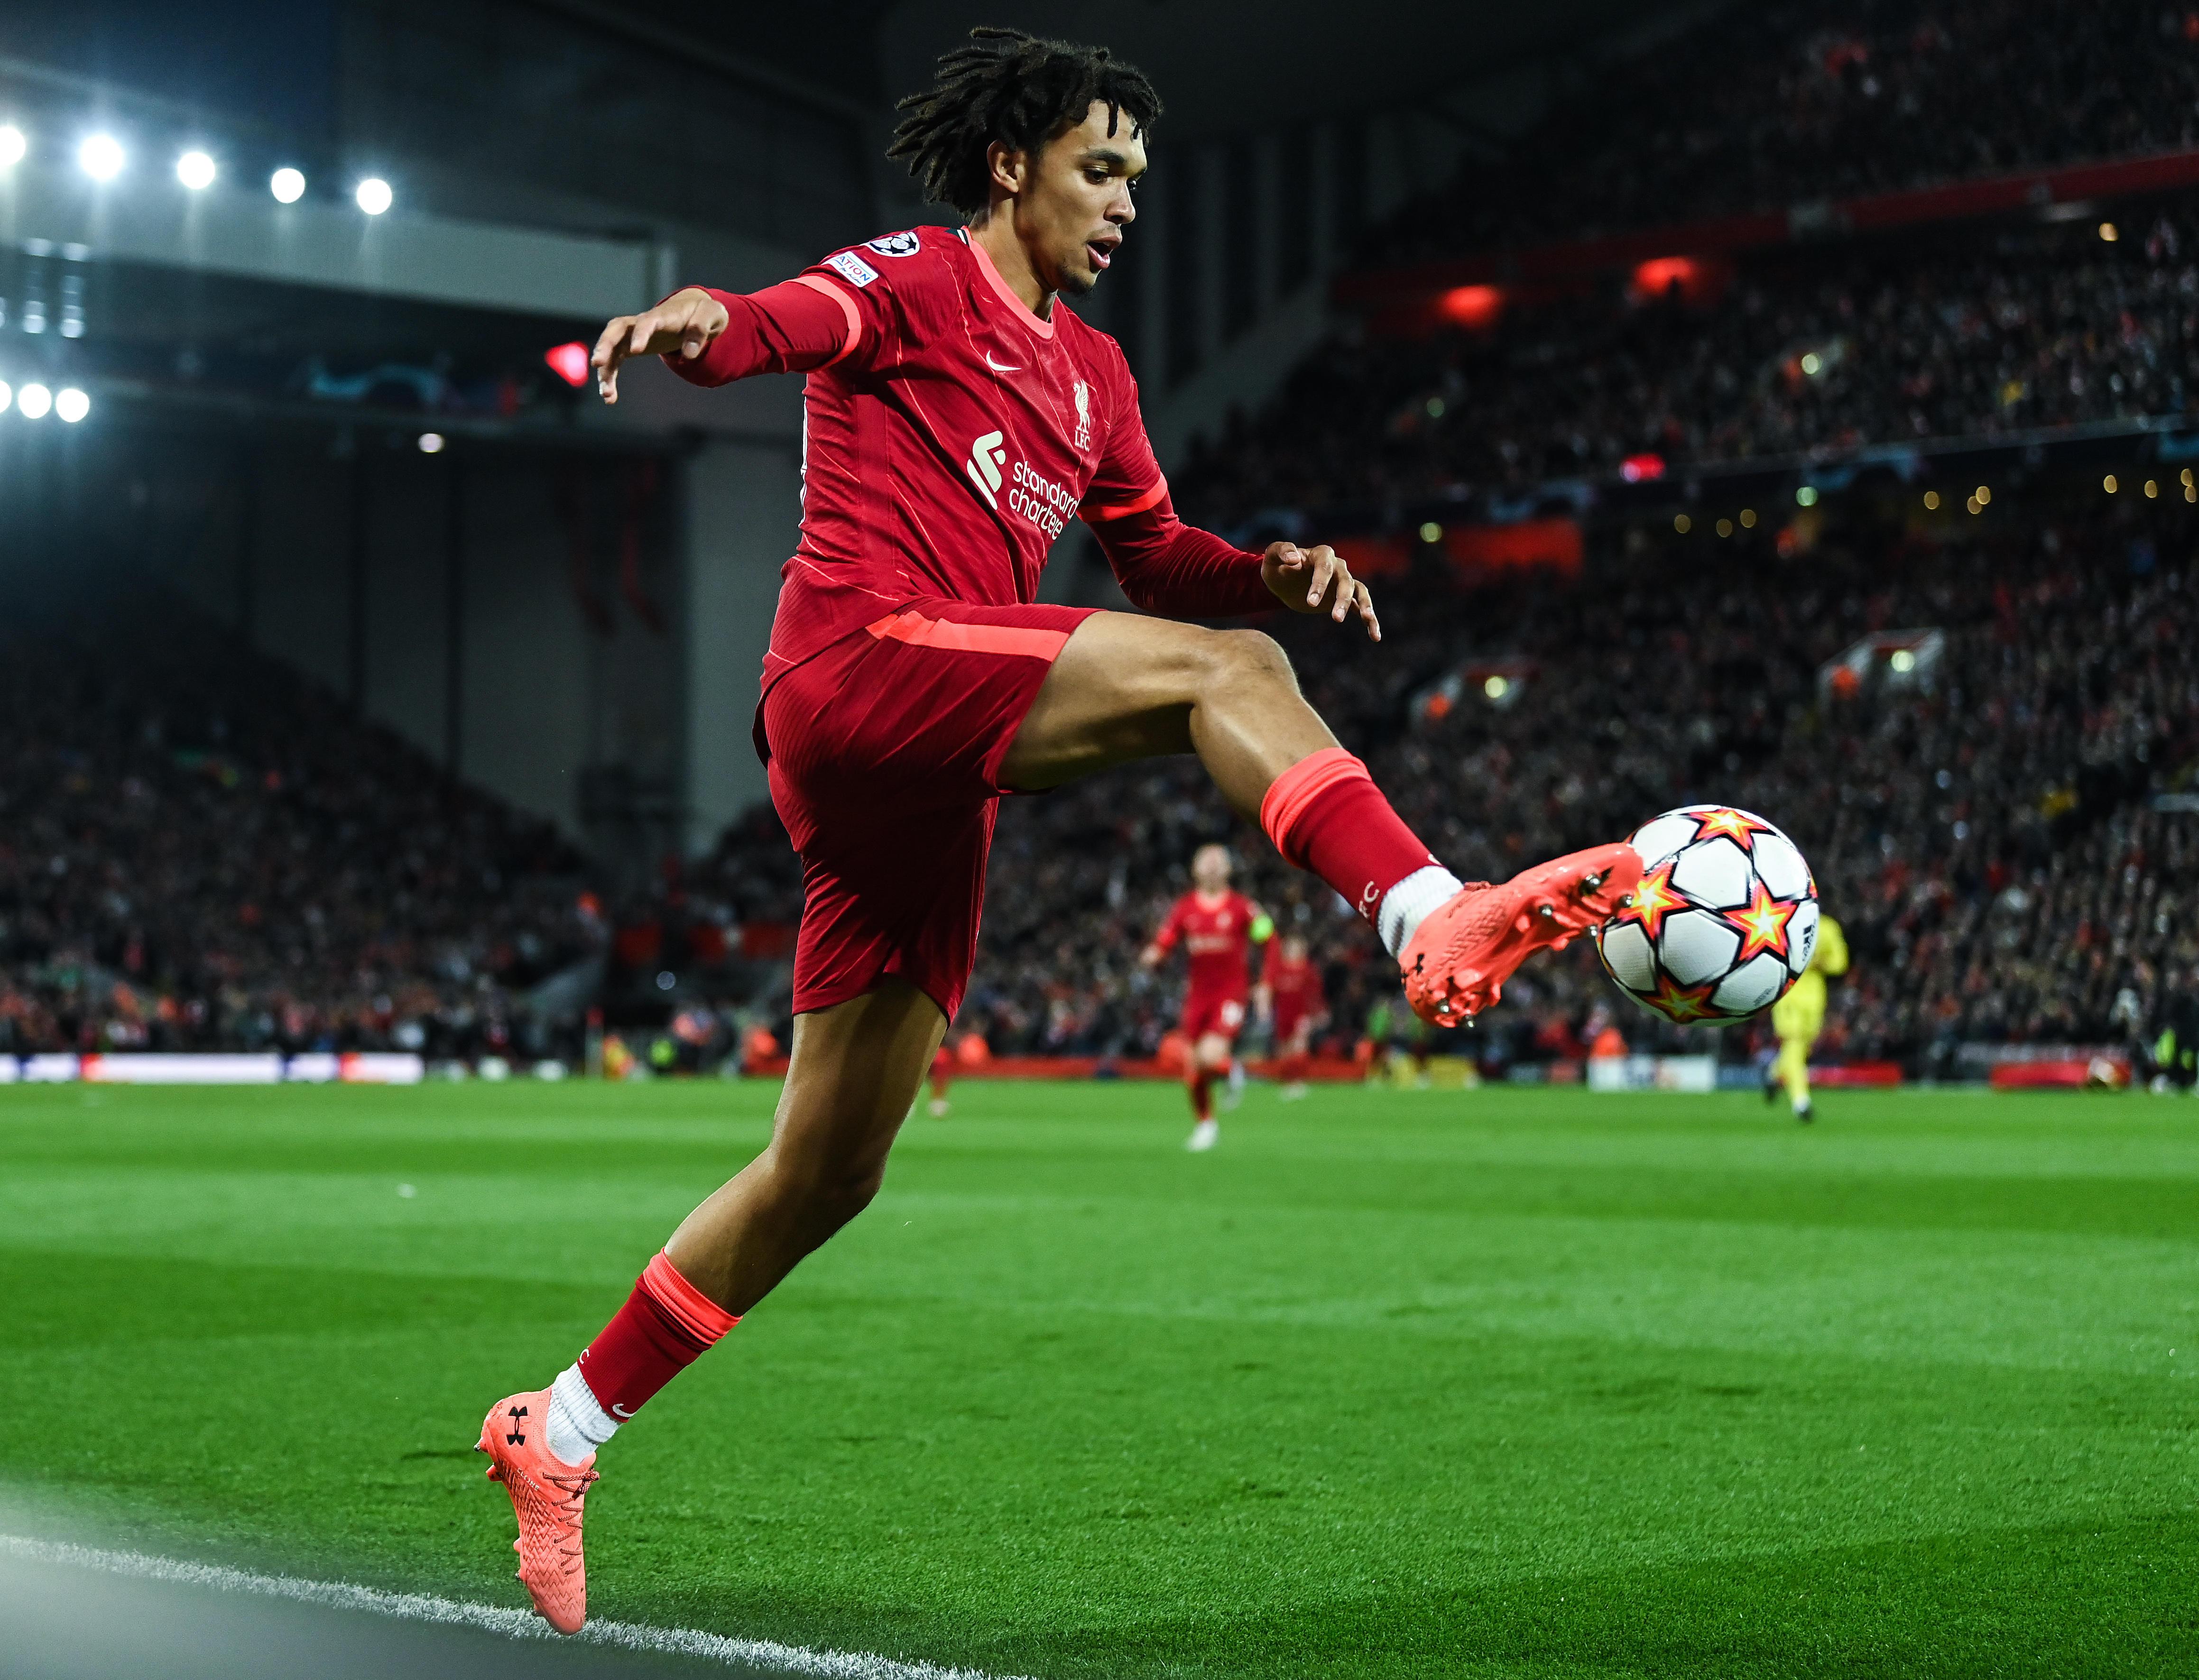 Trent Alexander-Arnold of Liverpool runs with the ball during the UEFA Champions League Semi Final Leg One match between Liverpool and Villarreal at Anfield on April 27, 2022 in Liverpool, England.